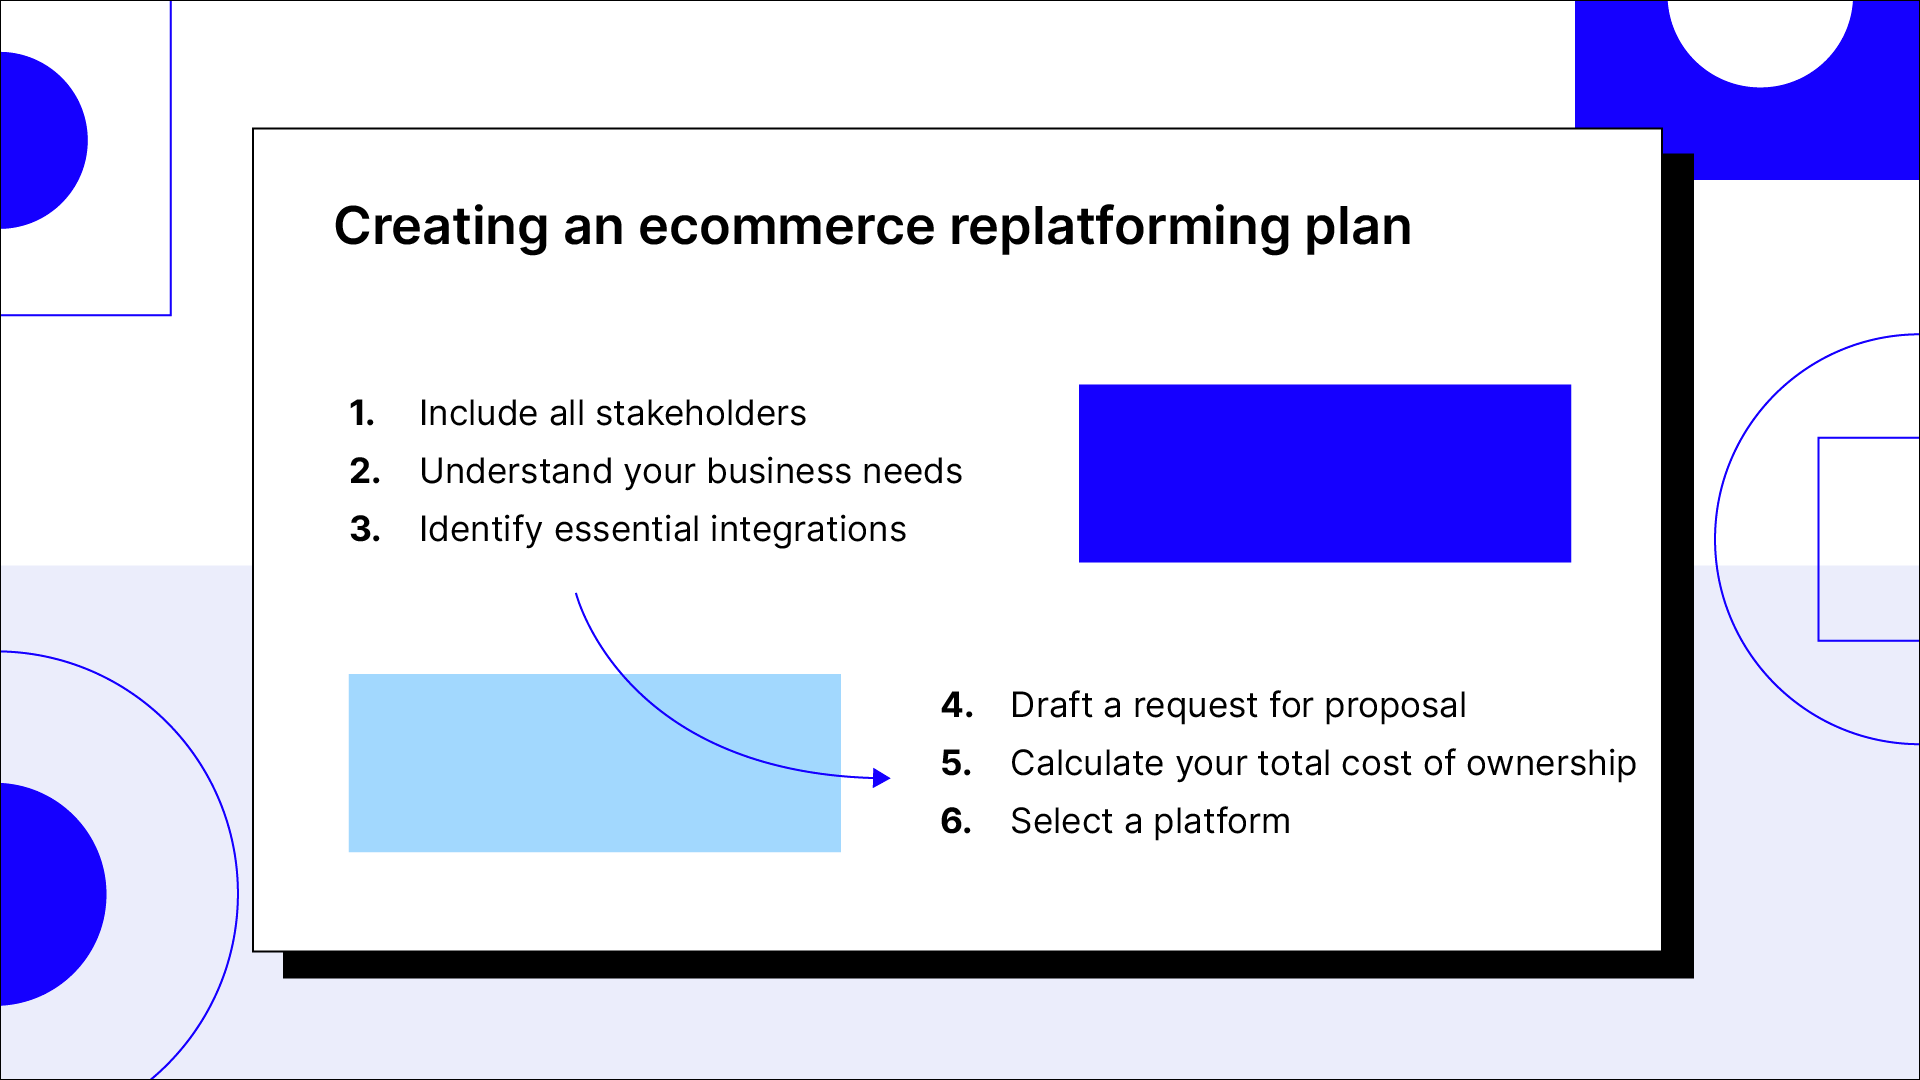 Steps to create an ecommerce replatforming plan.